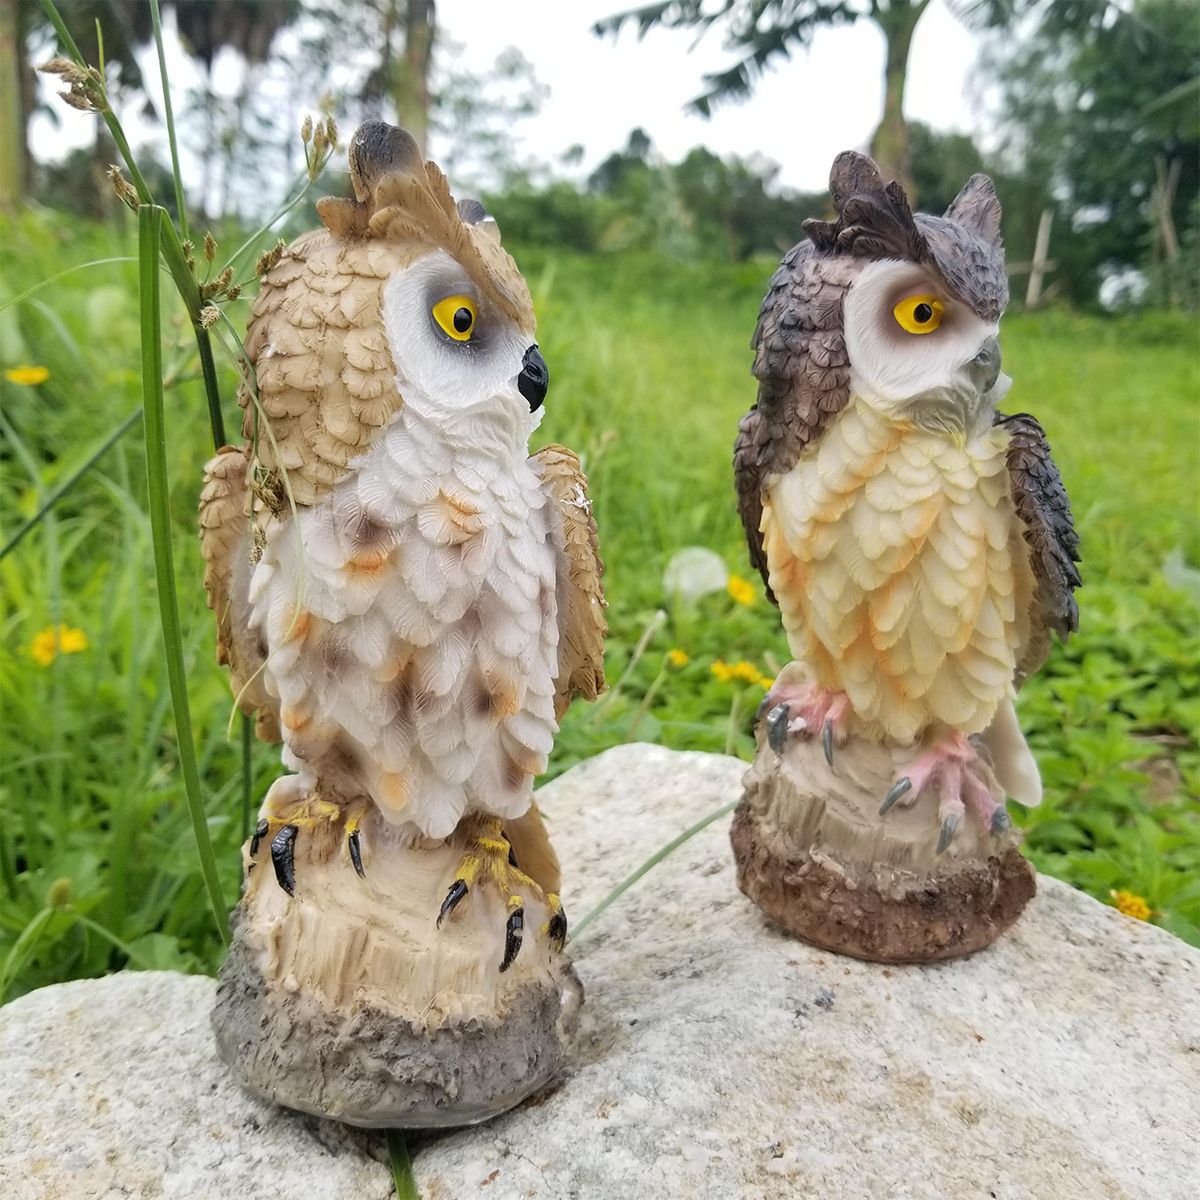 Synthetic-Resin-Owl-Outdoor-Hunting-Decoy-Garden-Yard-Landscape-Decorations-1561575